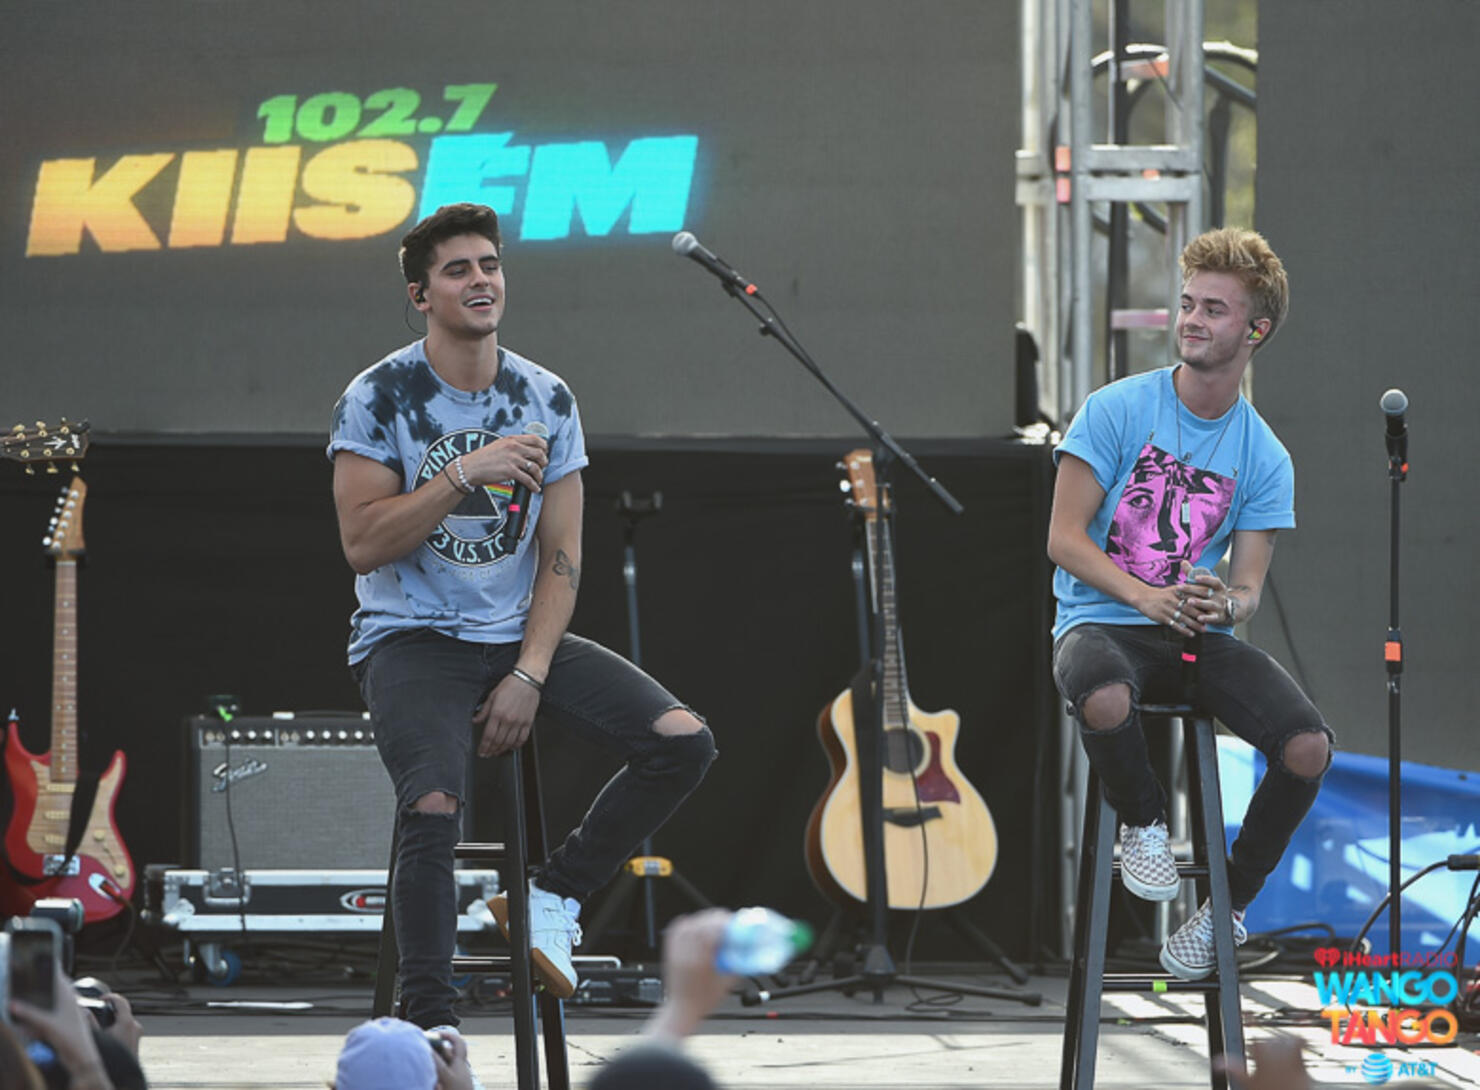  Jack Gilinsky and Jack Johnson of Jack & Jack perform live during the KIIS FM Wango Tango Village at the 2018 iHeartRadio Wango Tango by AT&T in Los Angeles, California.